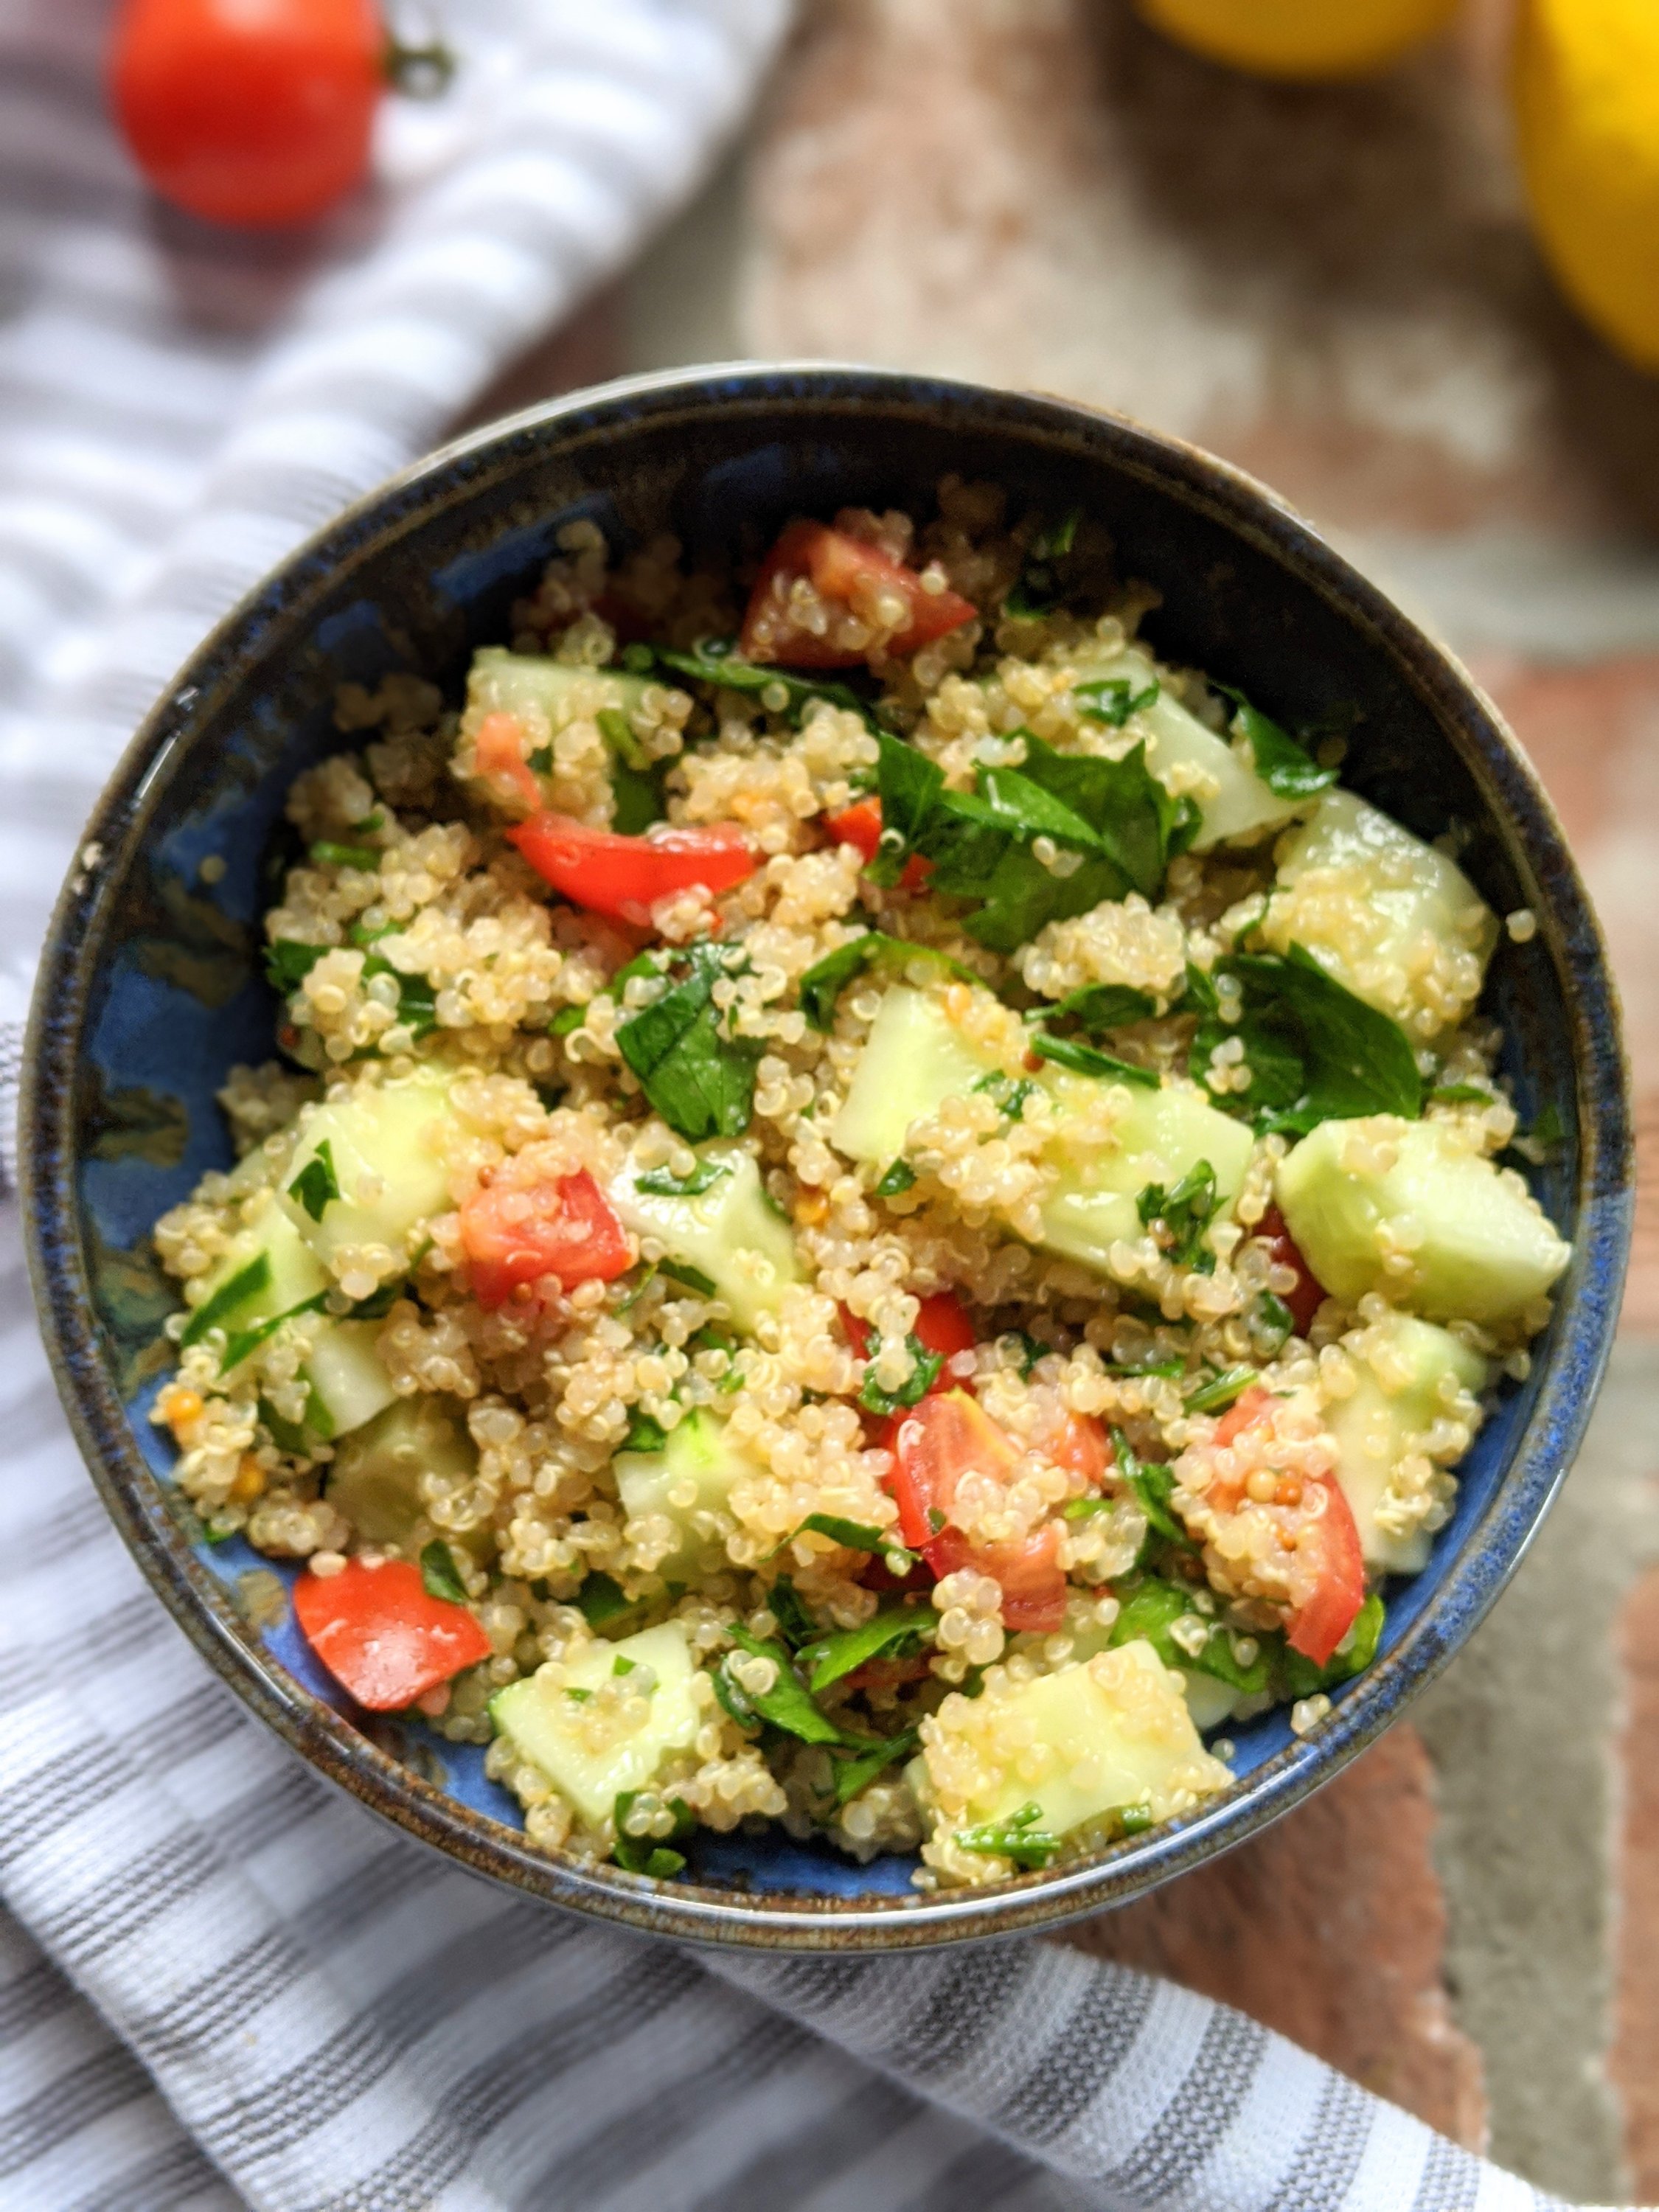 vegan summer salads with quinoa healthy plant based quinoa salad recipes vegan gluten free high protein vegan recipes for lunch or dinner